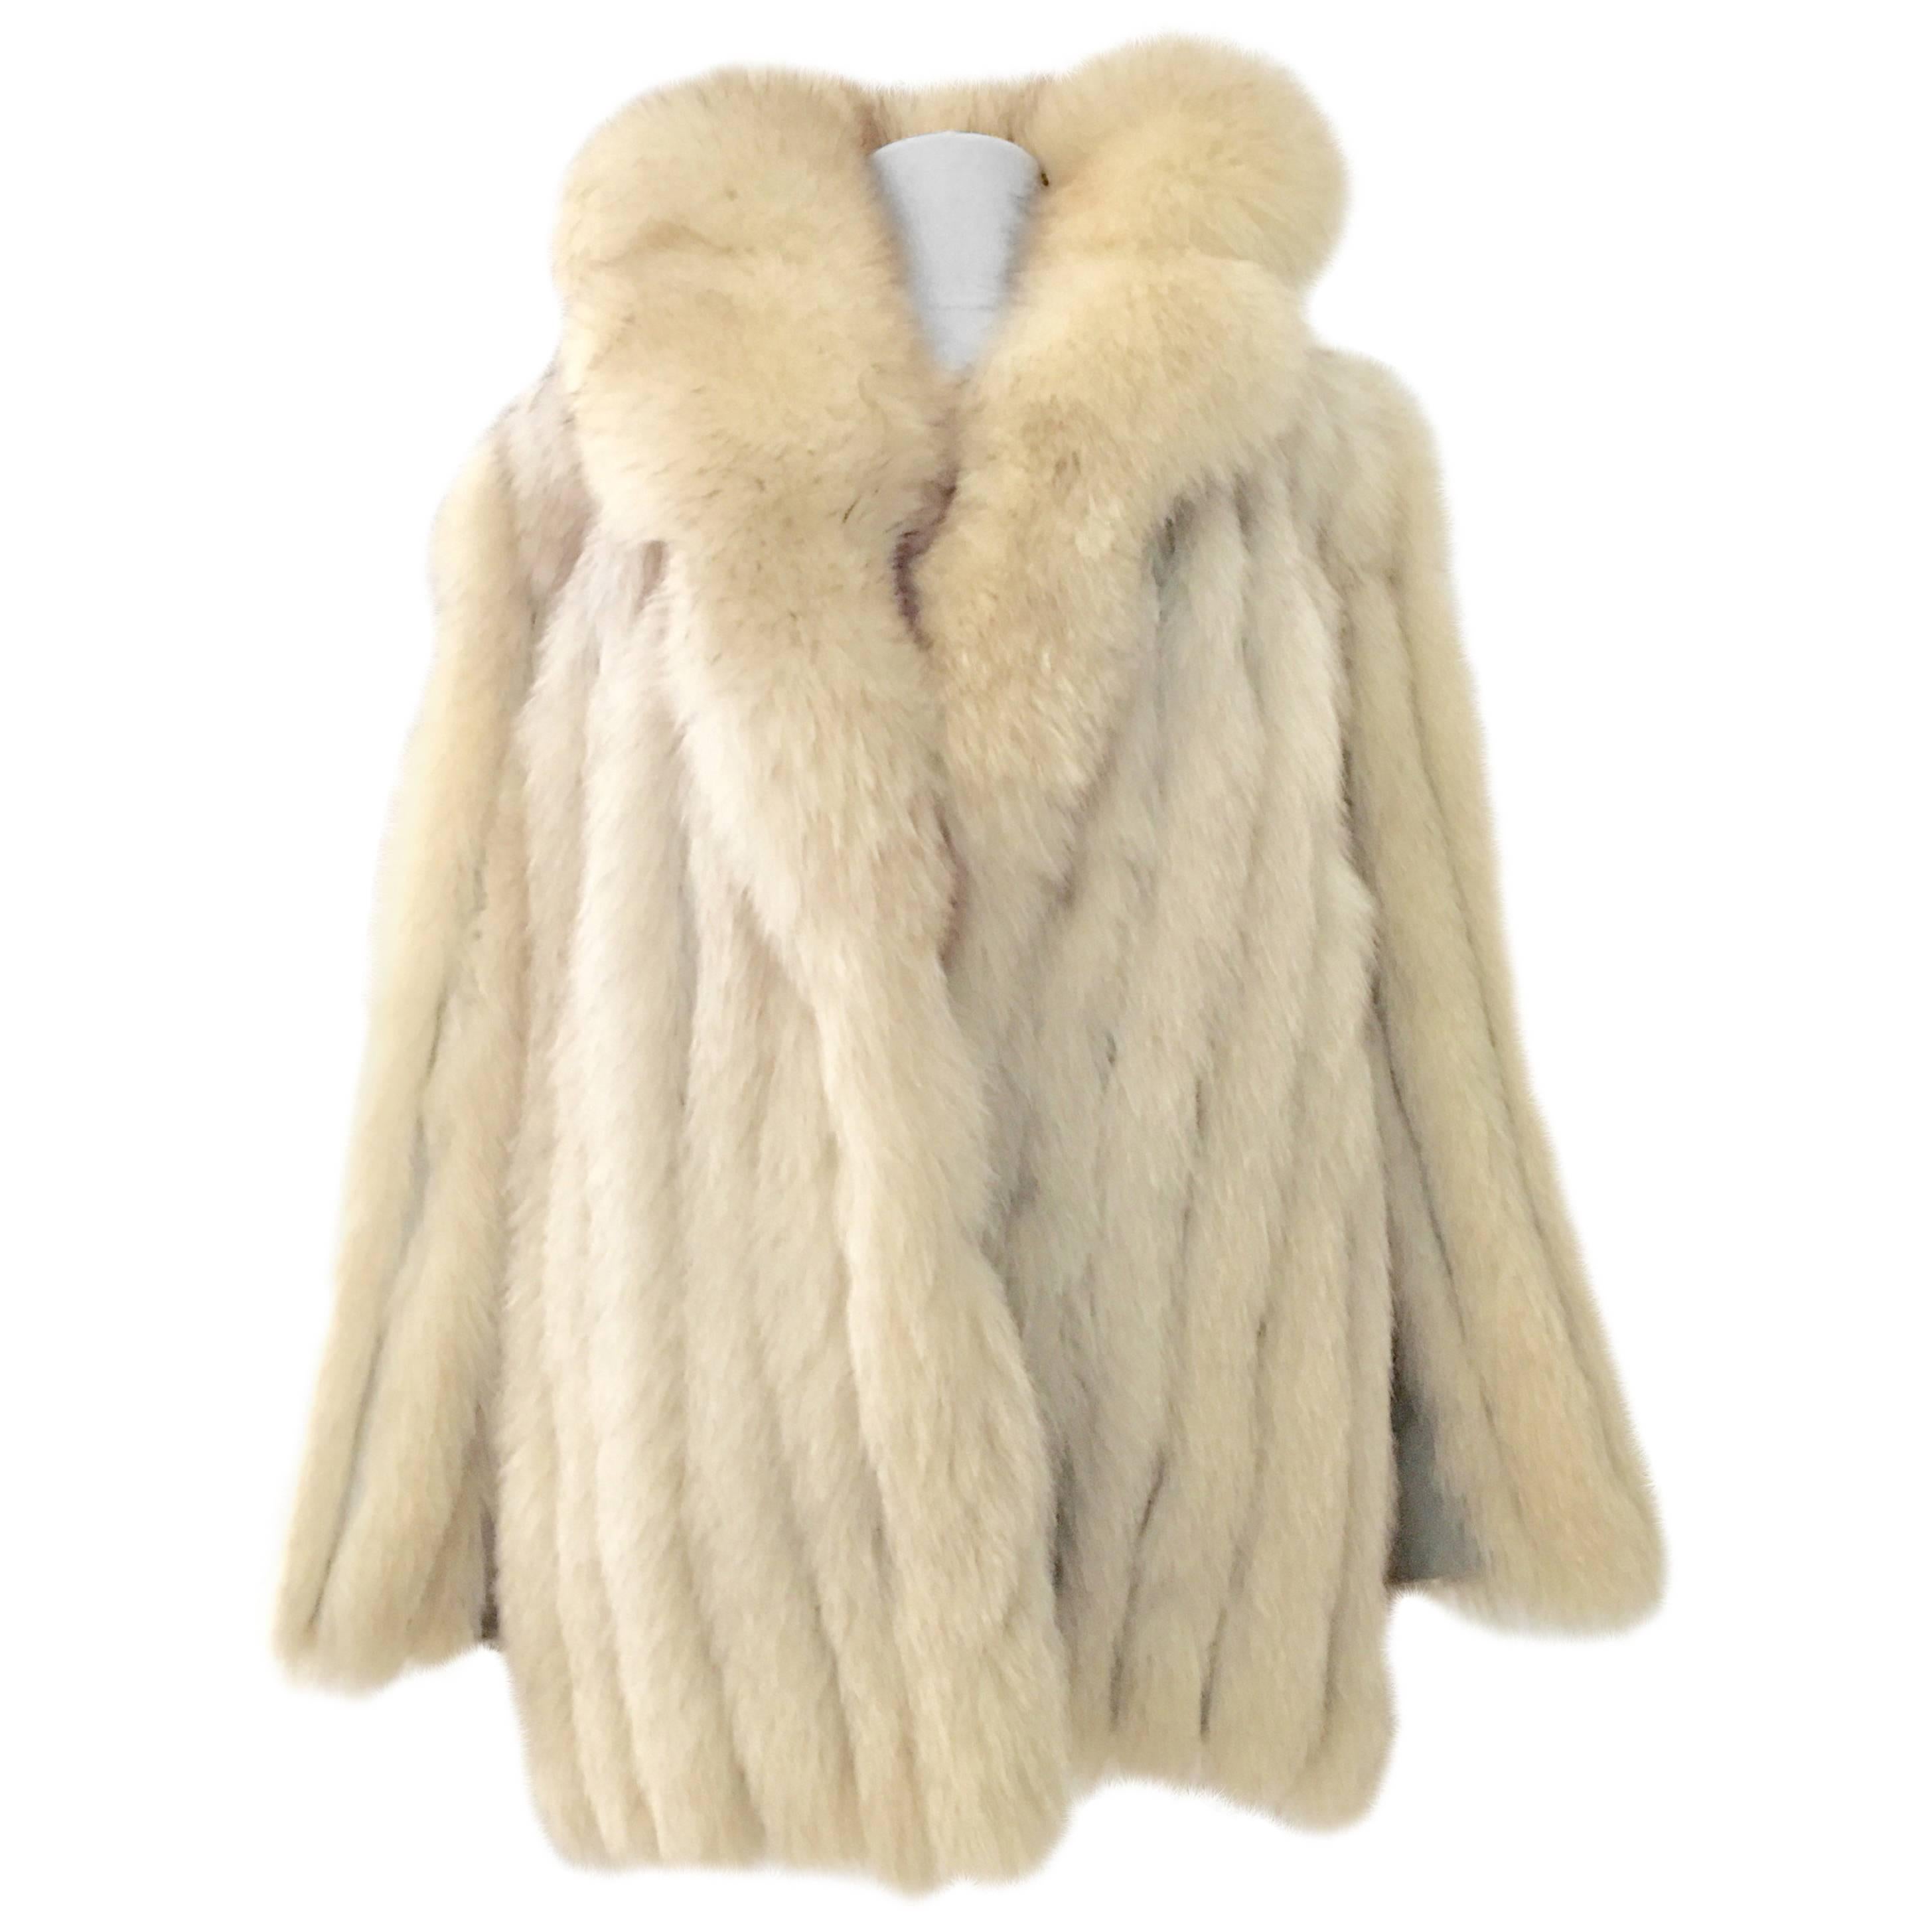 Silver Fox Fur and Leather Panel Vintage Coat By Nigbor Furs